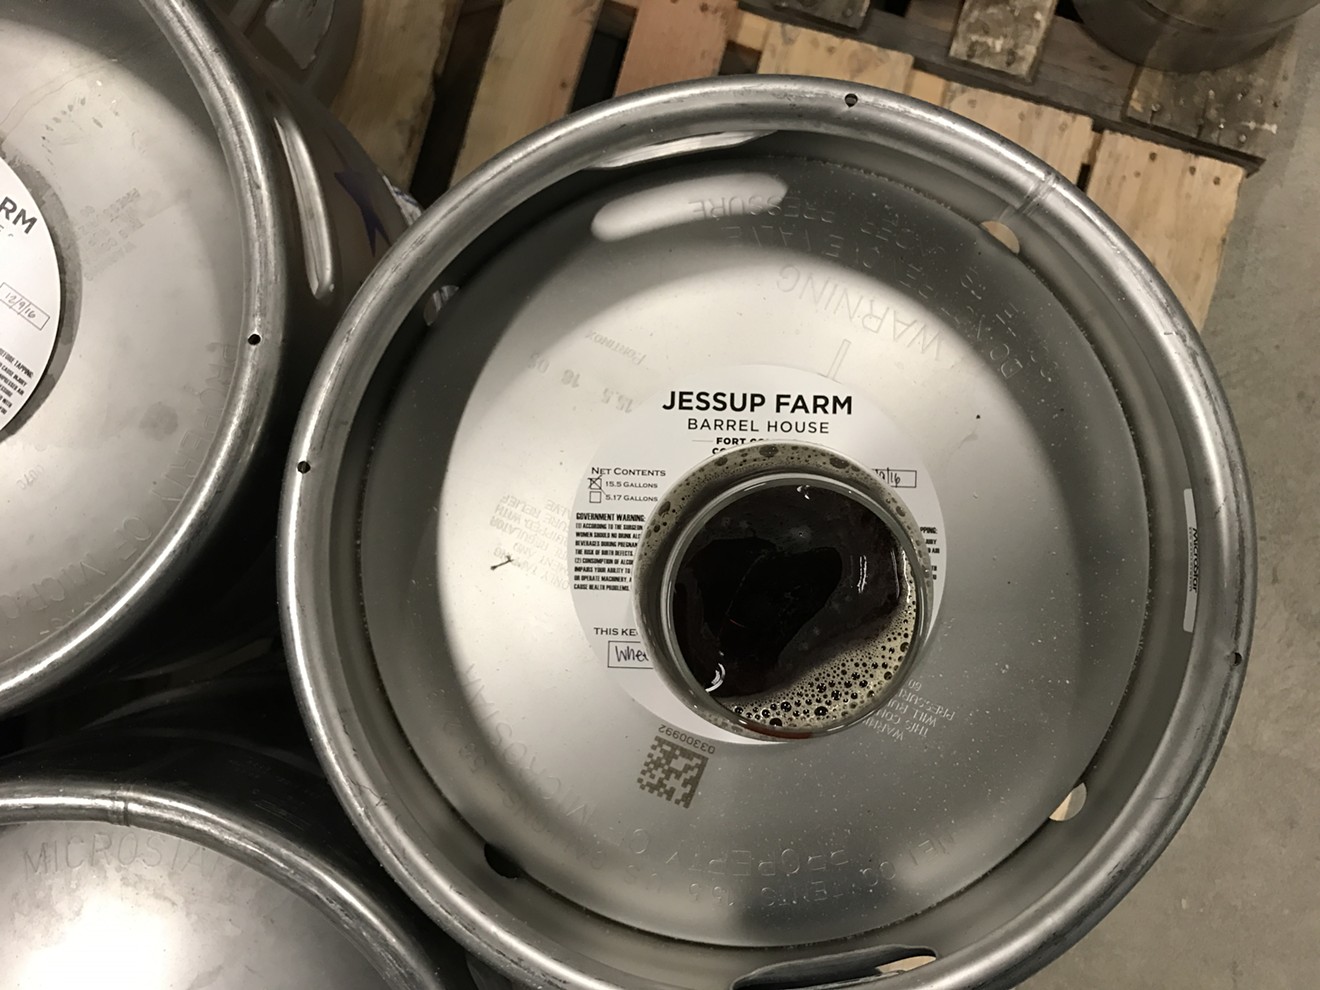 Jessup Farm Barrel House is one of Colorado Craft Distributors' first clients.